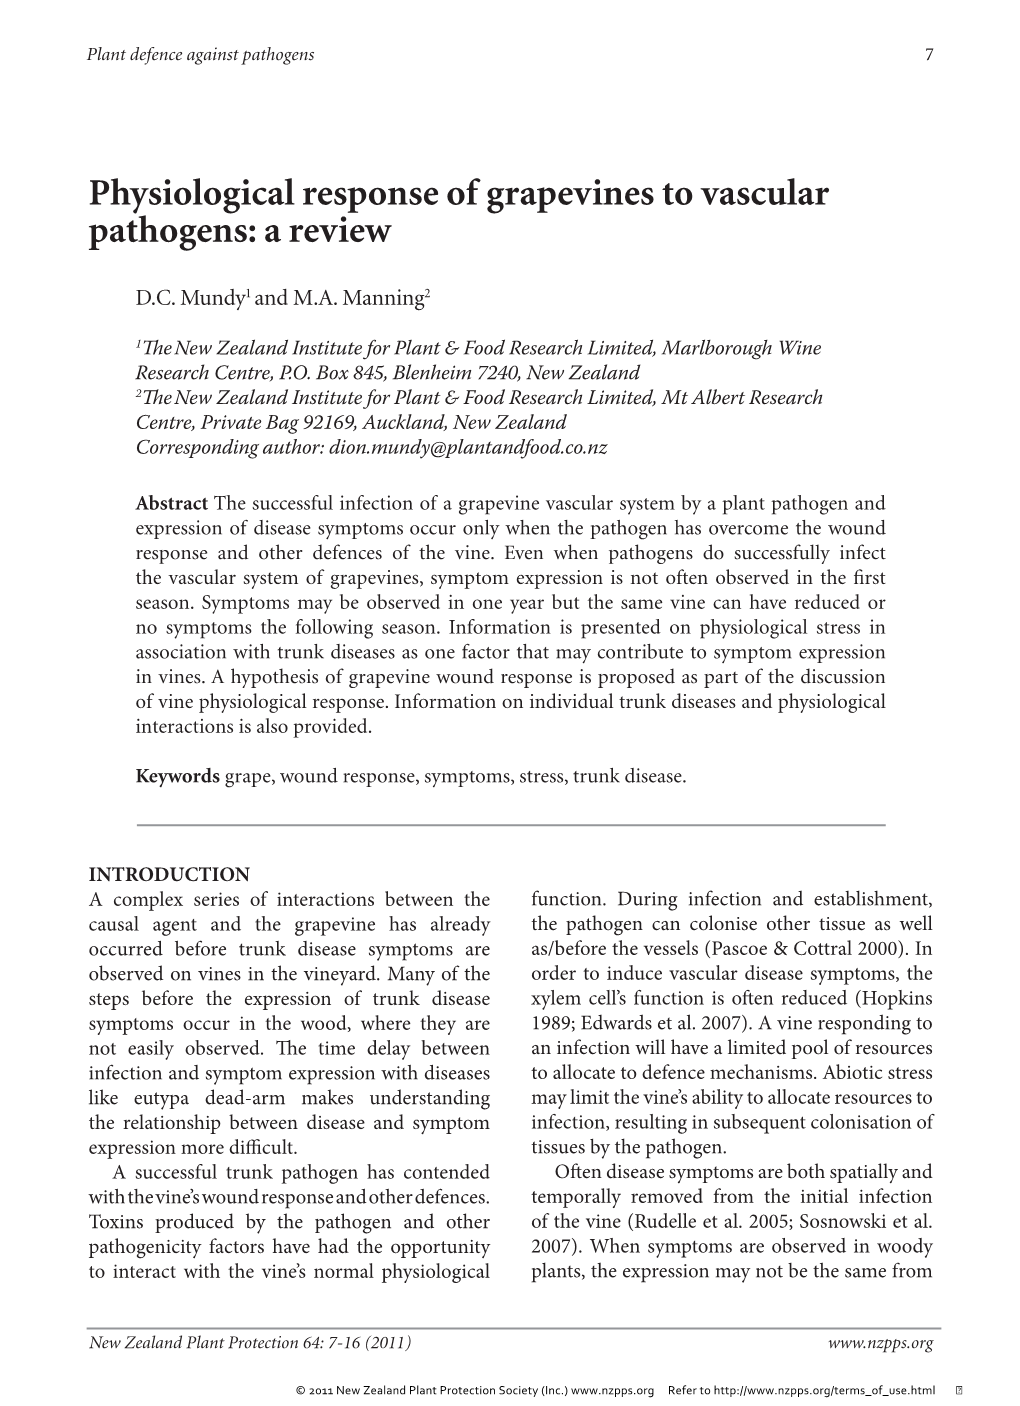 Physiological Response of Grapevines to Vascular Pathogens: a Review